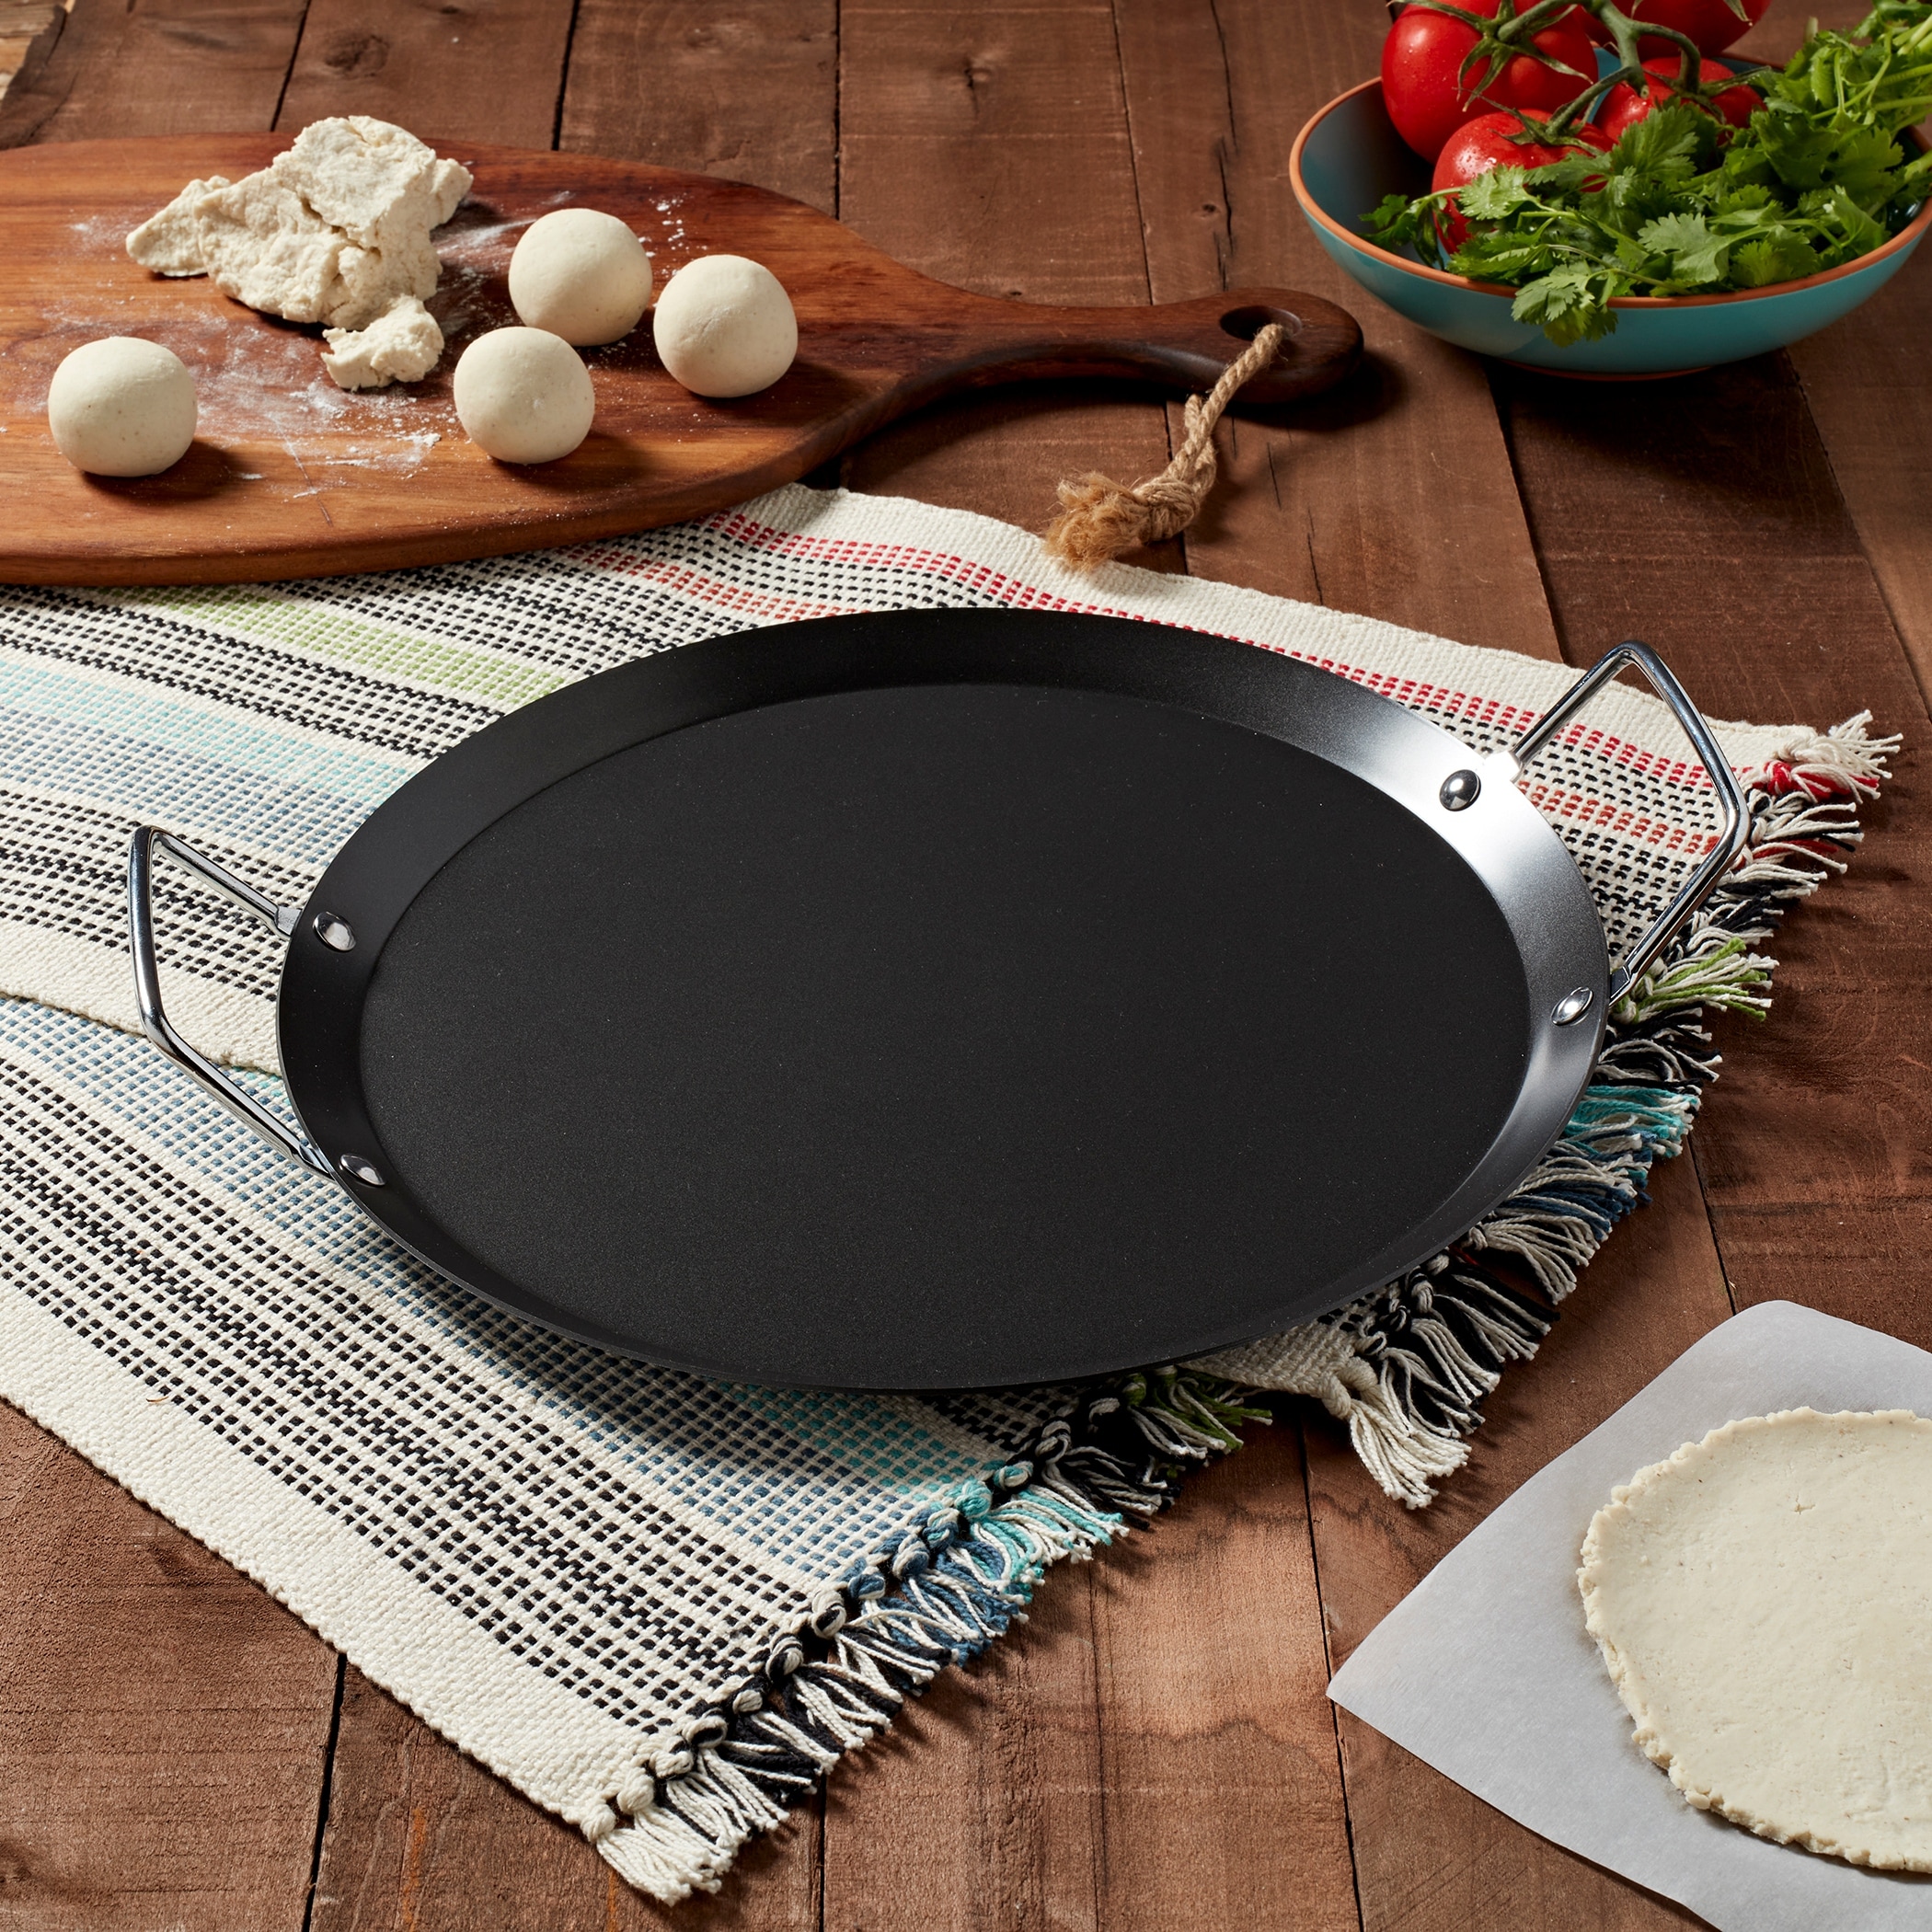 https://ak1.ostkcdn.com/images/products/is/images/direct/9ba22cbd90efdbc4466b20f371b4bdfa56d8705a/Infuse-13-inch-Round-Carbon-Steel-Comal---Griddle.jpg